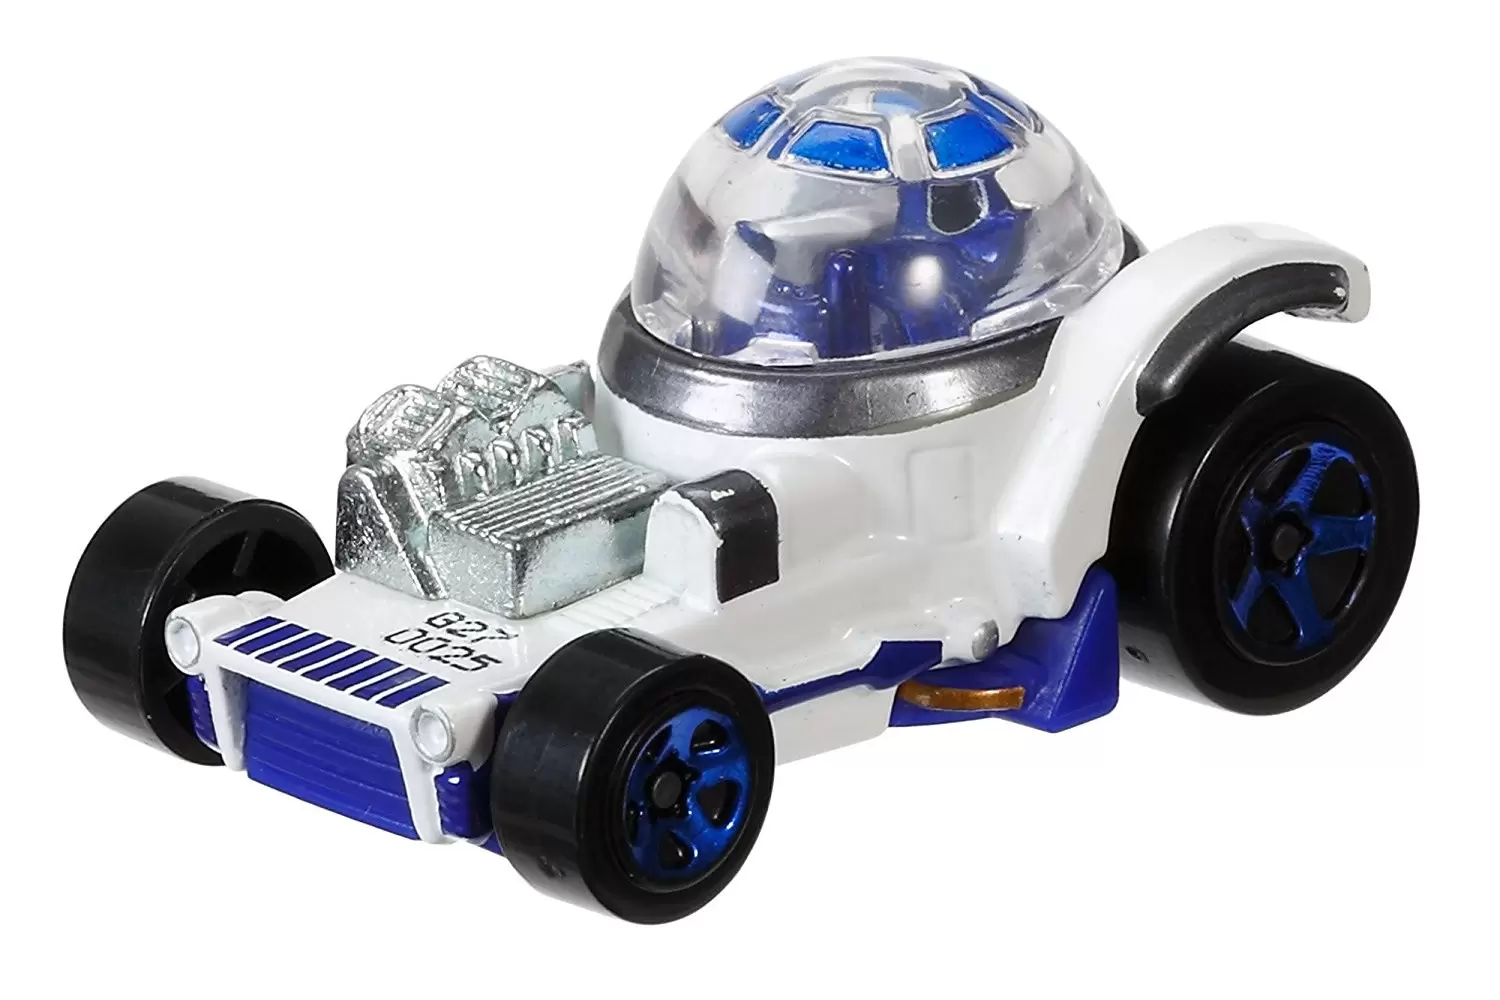 Character Cars Star Wars - R2-D2